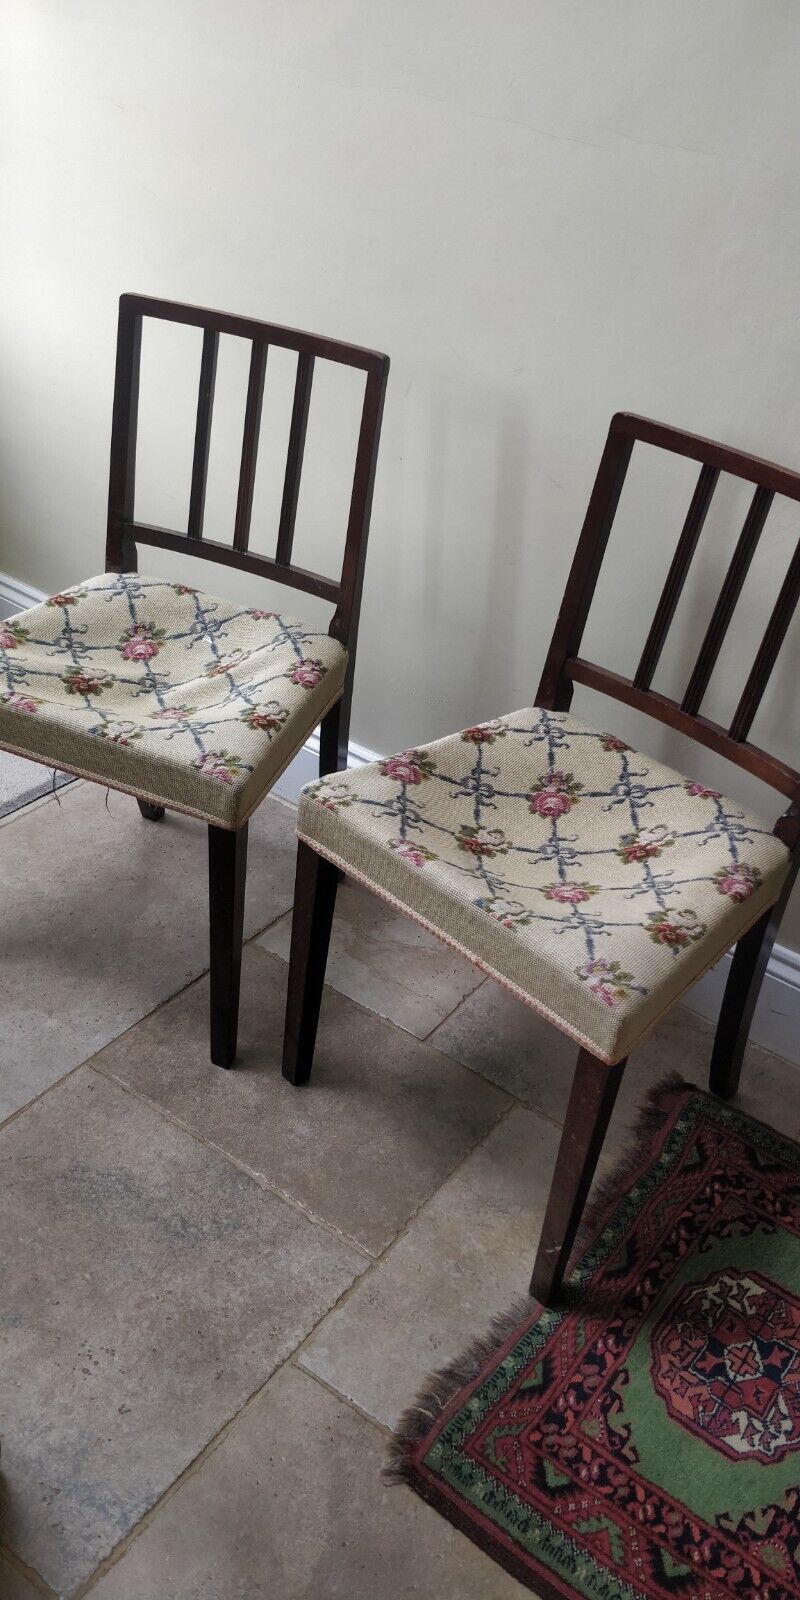 A pair of Antique Brown Wooden Dining Chairs with Tapestry Seats in need of TLC